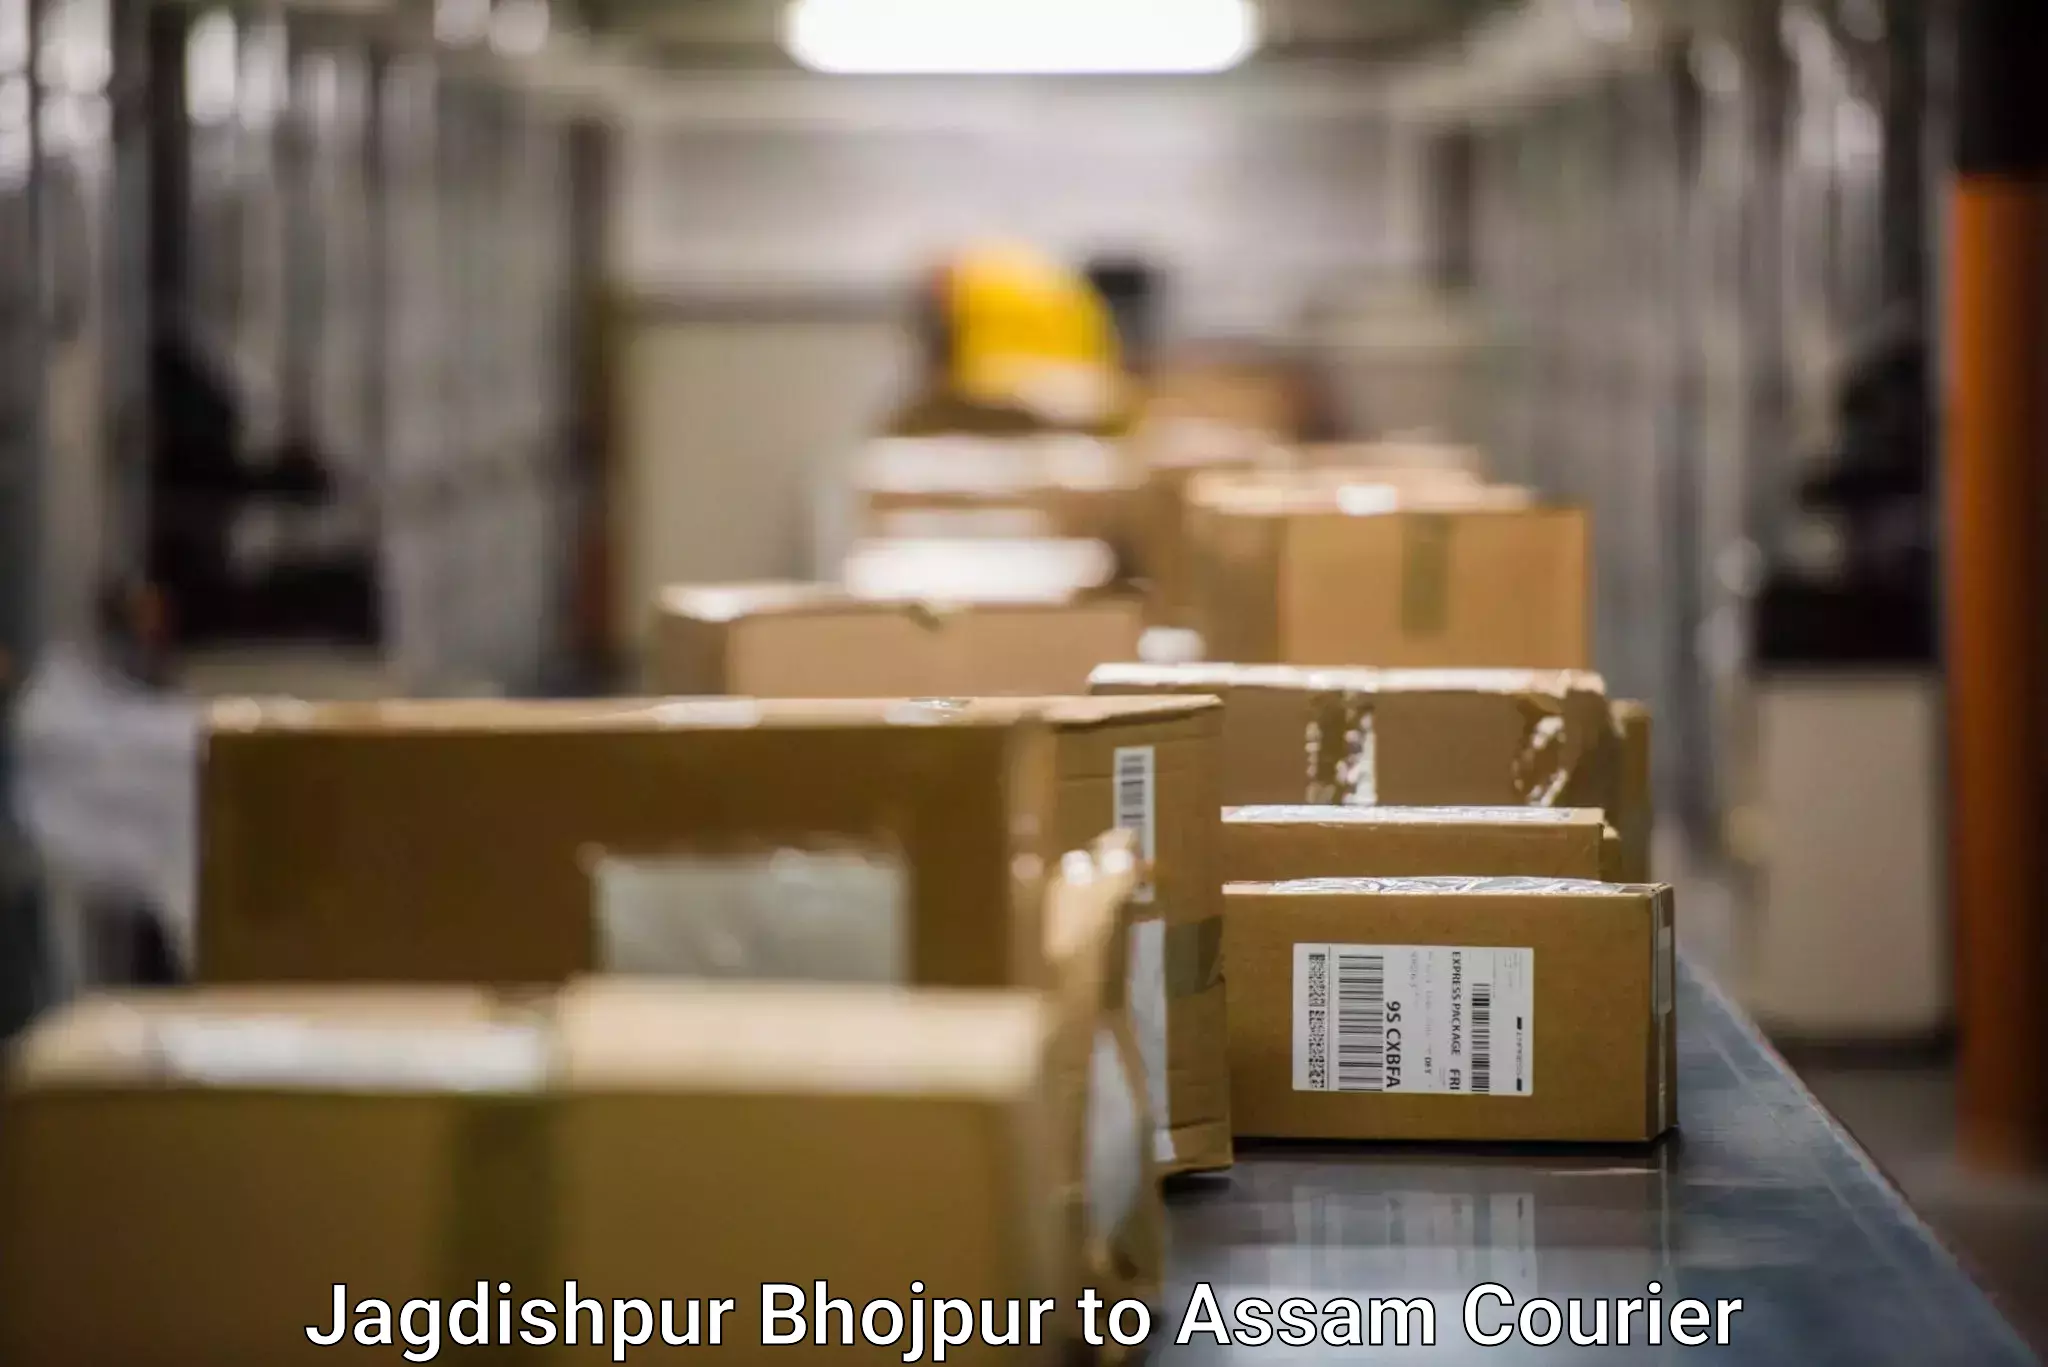 Courier service booking Jagdishpur Bhojpur to Dhemaji